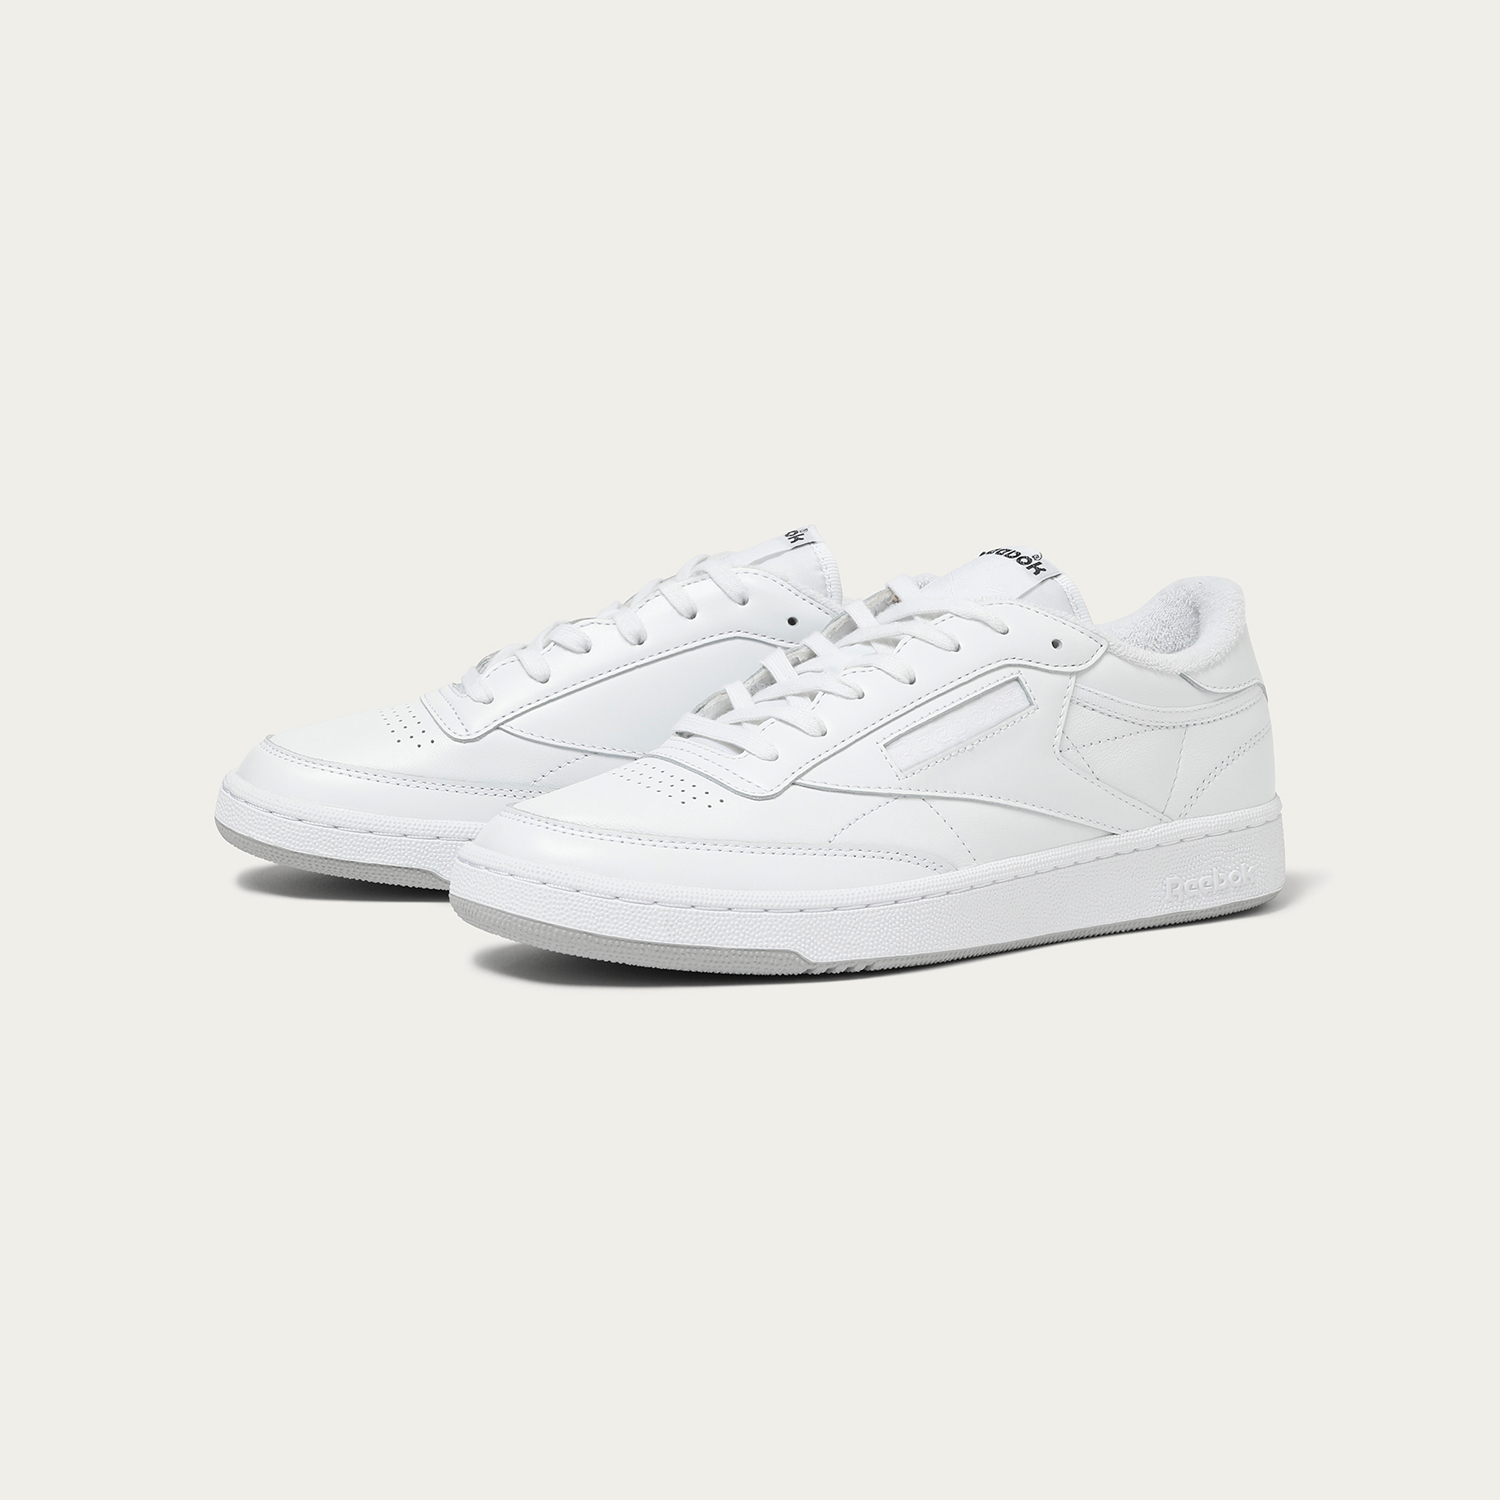 Reebok's Club C Was Made Even More Minimalist By UNITED ARROWS